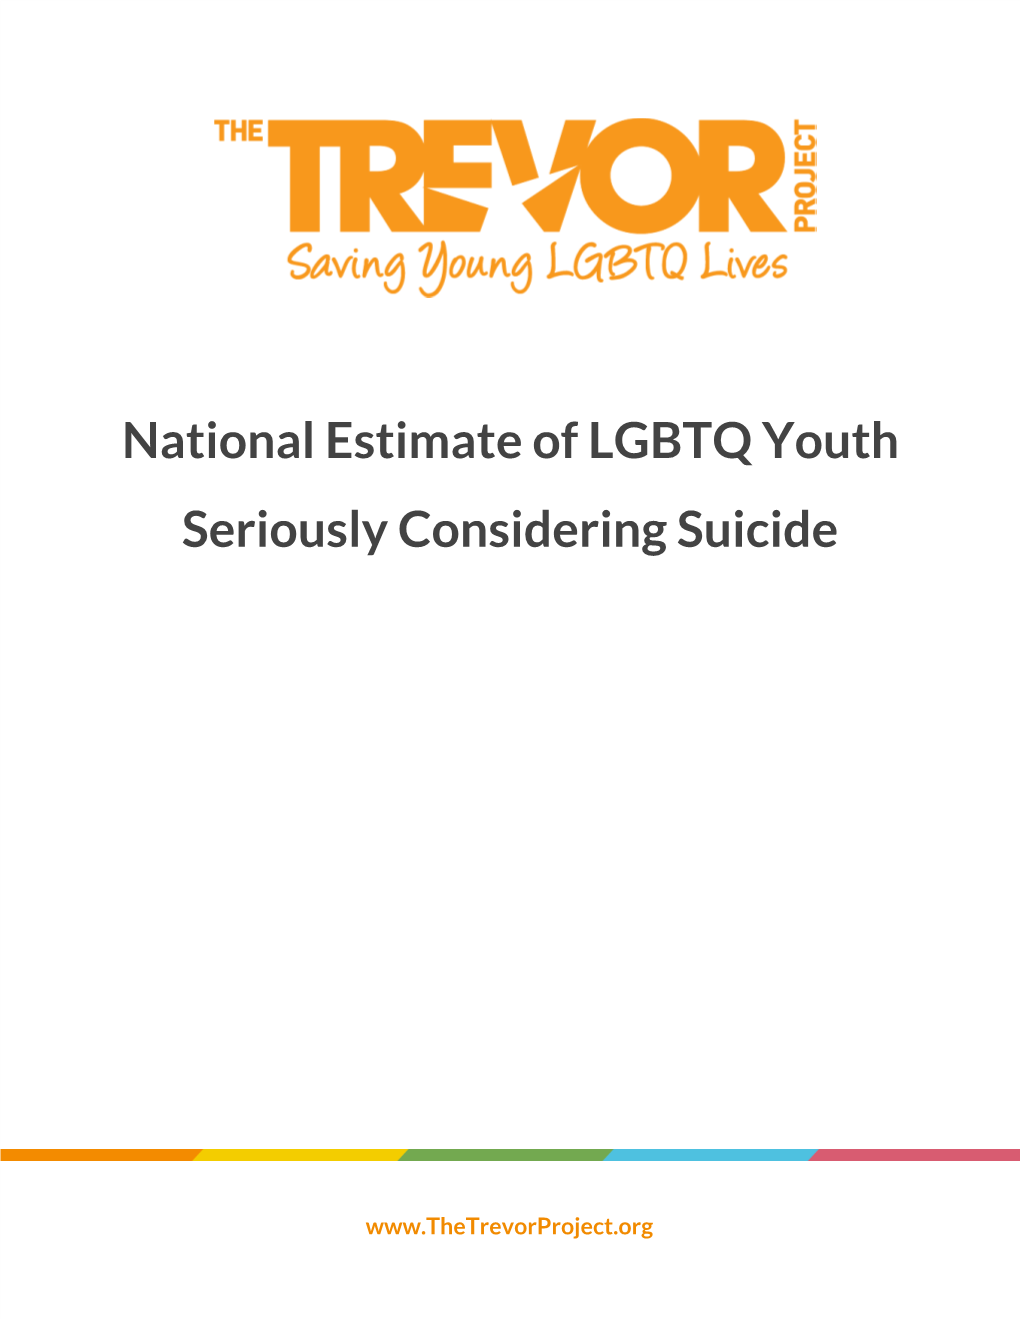 National Estimate of LGBTQ Youth Seriously Considering Suicide